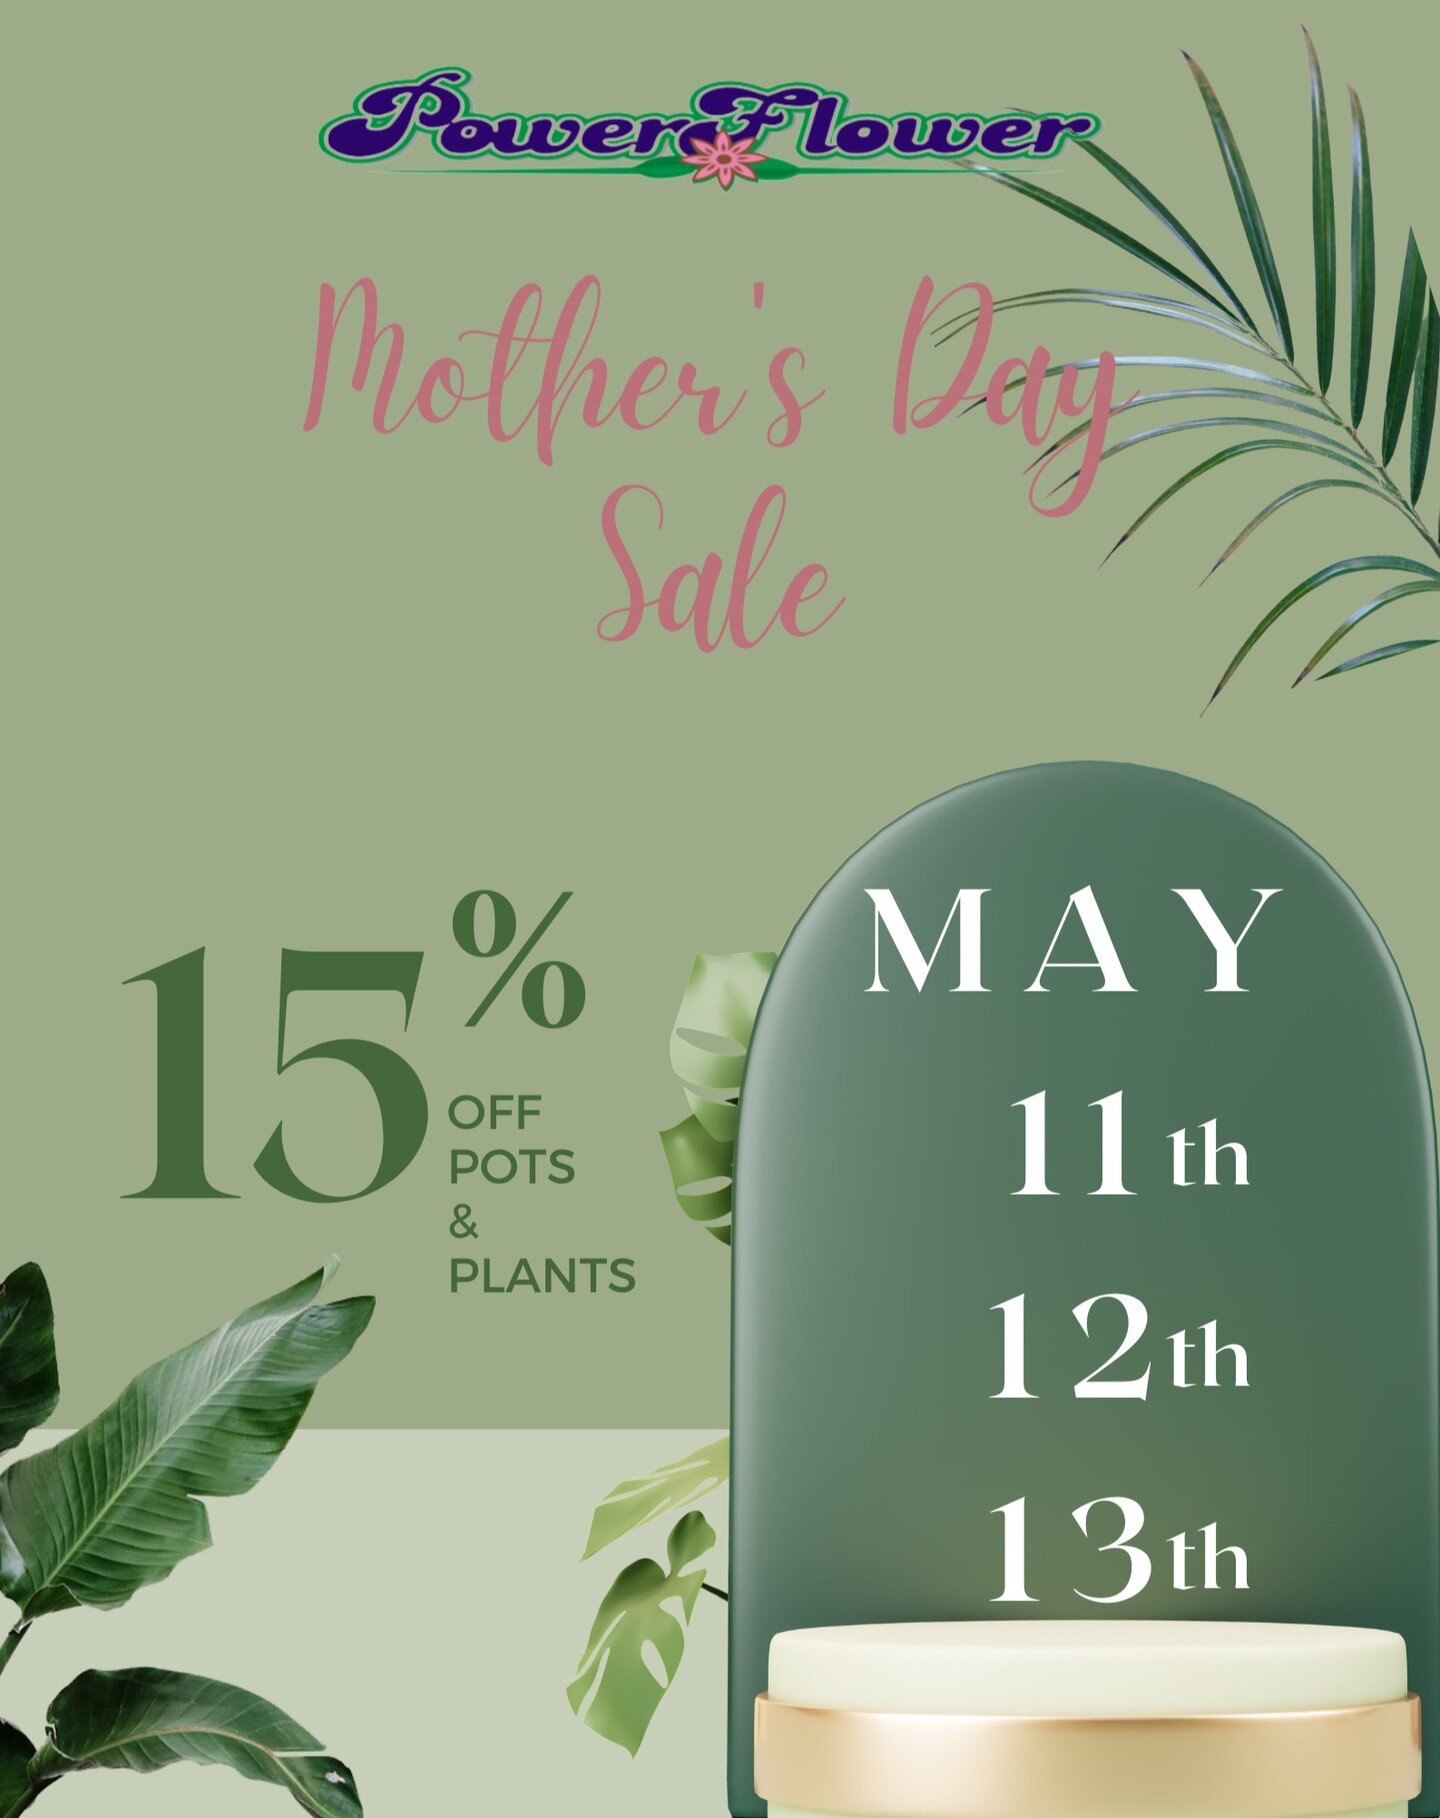 Share your love this Mother's Day!

Take advantage of our sale and get 15% off on all pots and plants.

Sale runs from May 11th - May 13th.